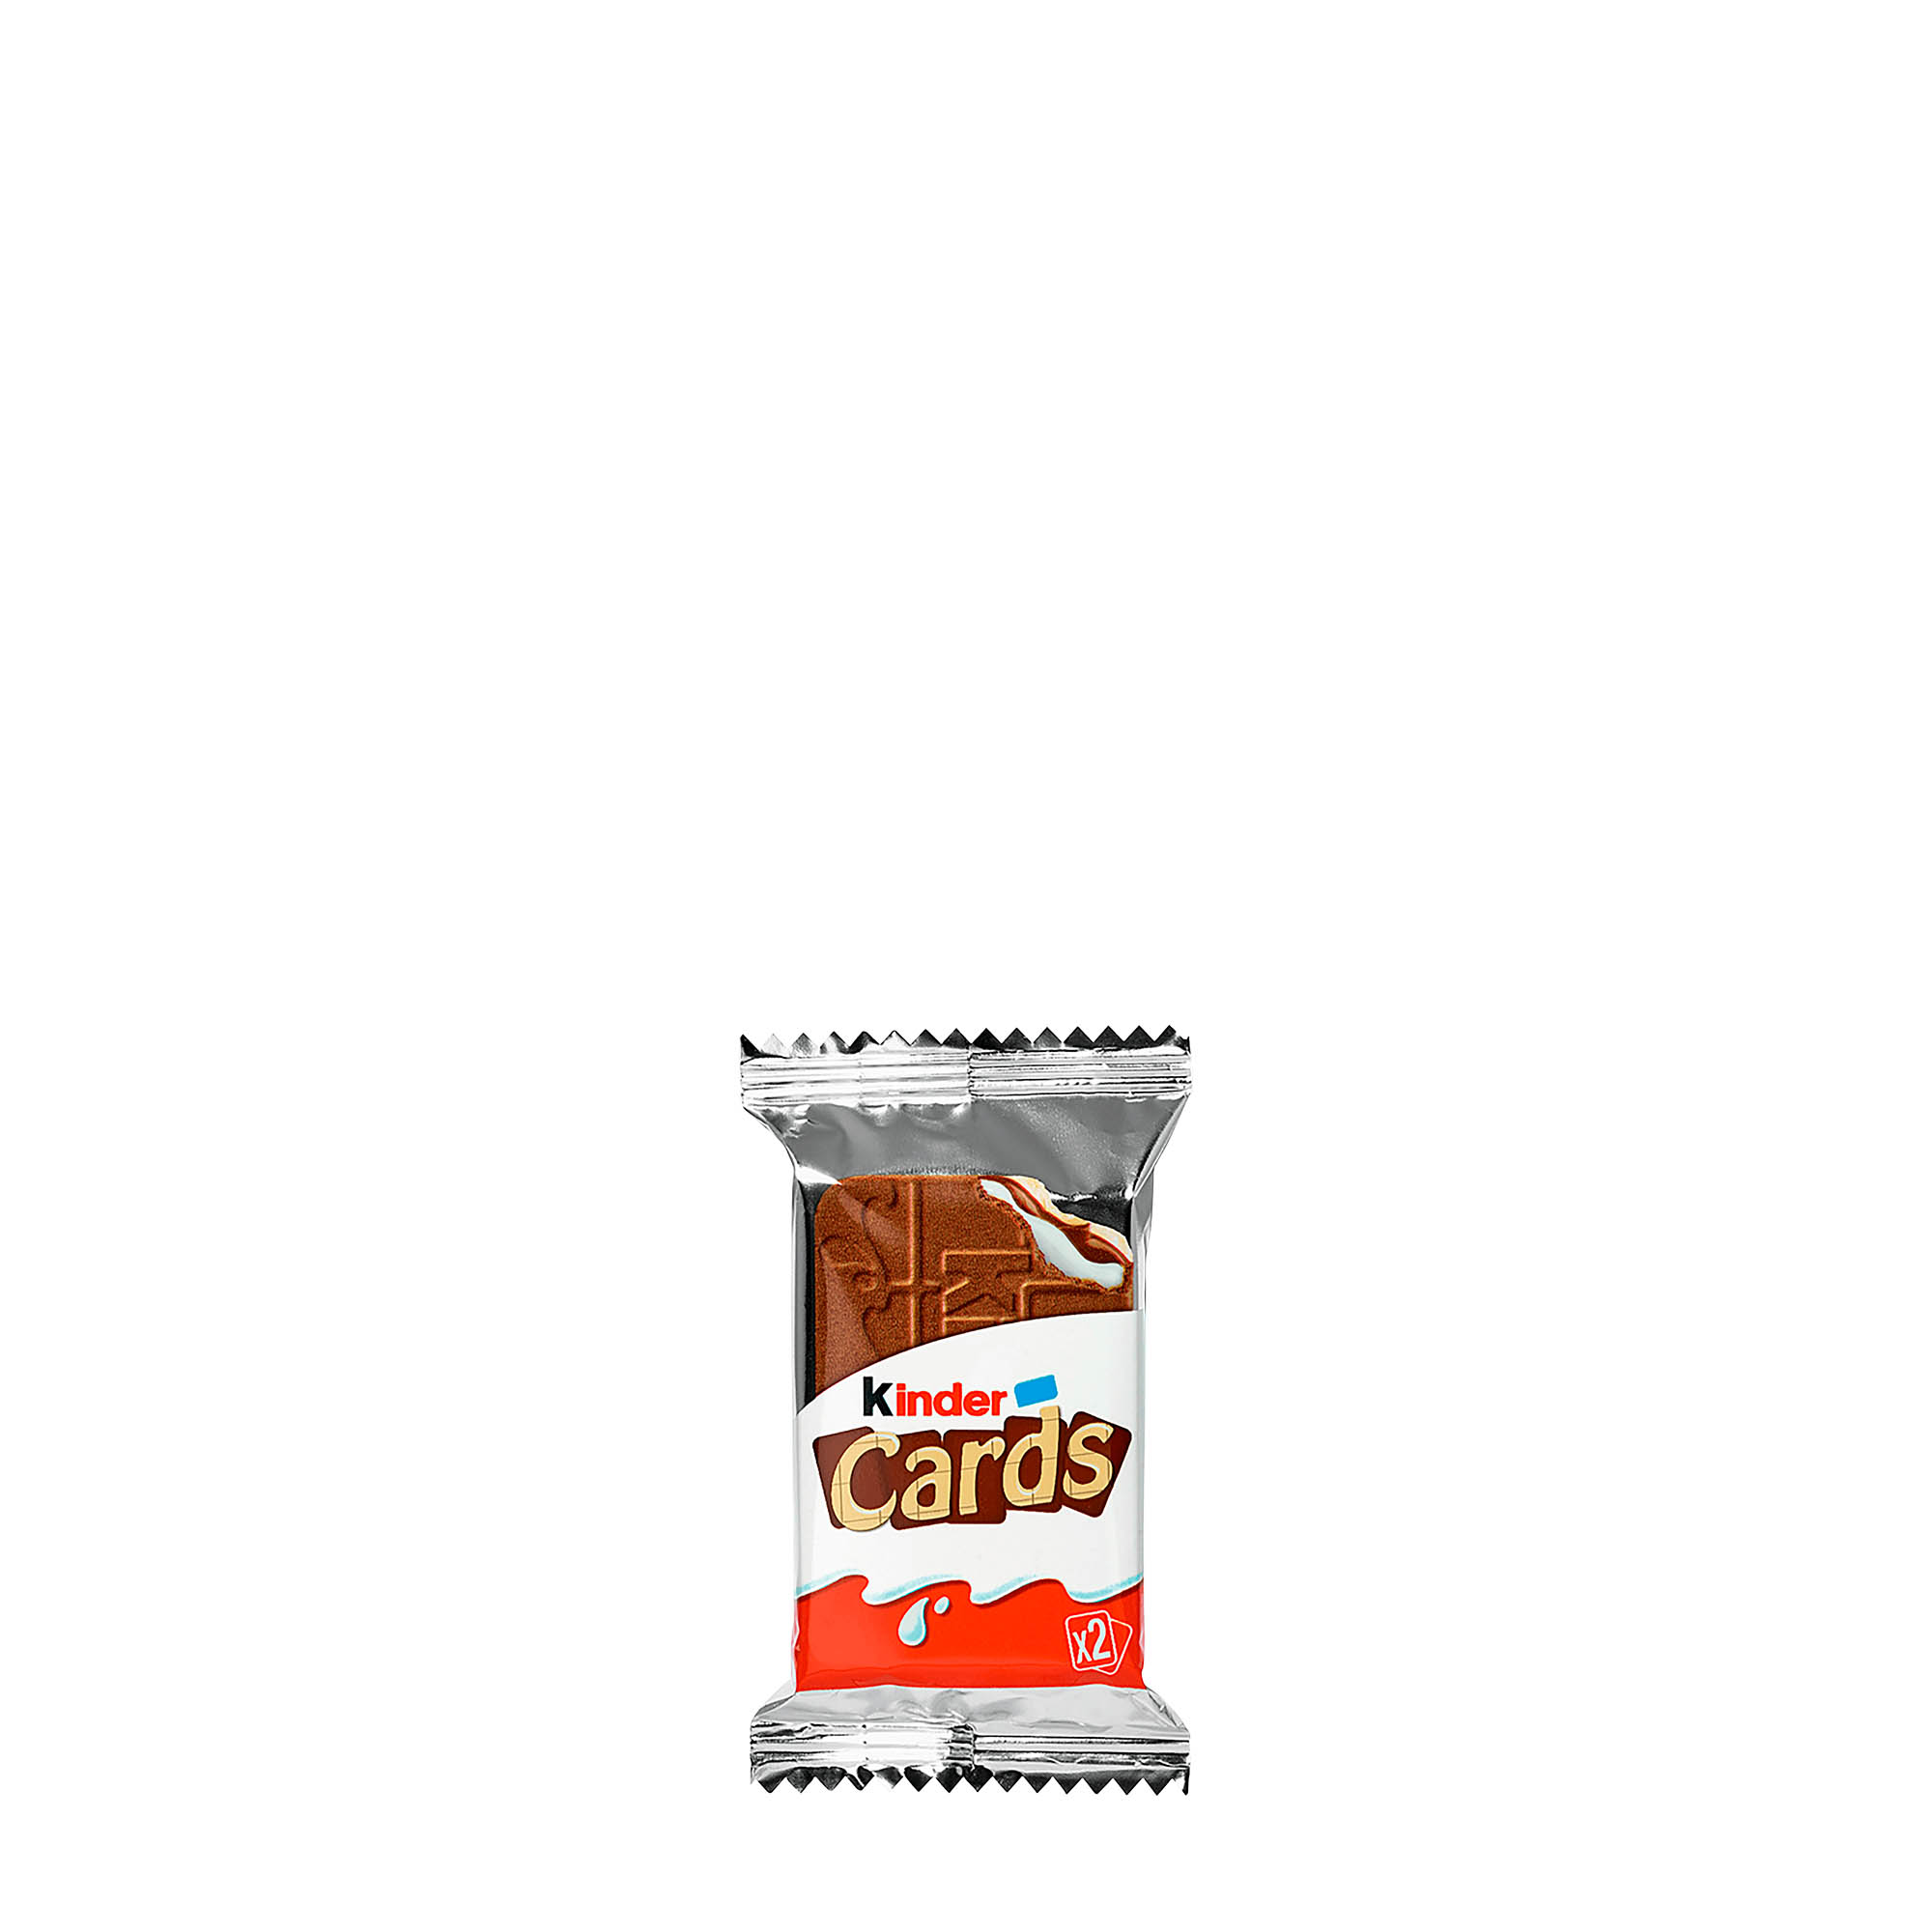 Back in Stock! Kinder Cards is a new unique biscuit with a surprisingly  creamy milk and cocoa filling enclosed within cocoa and milk…